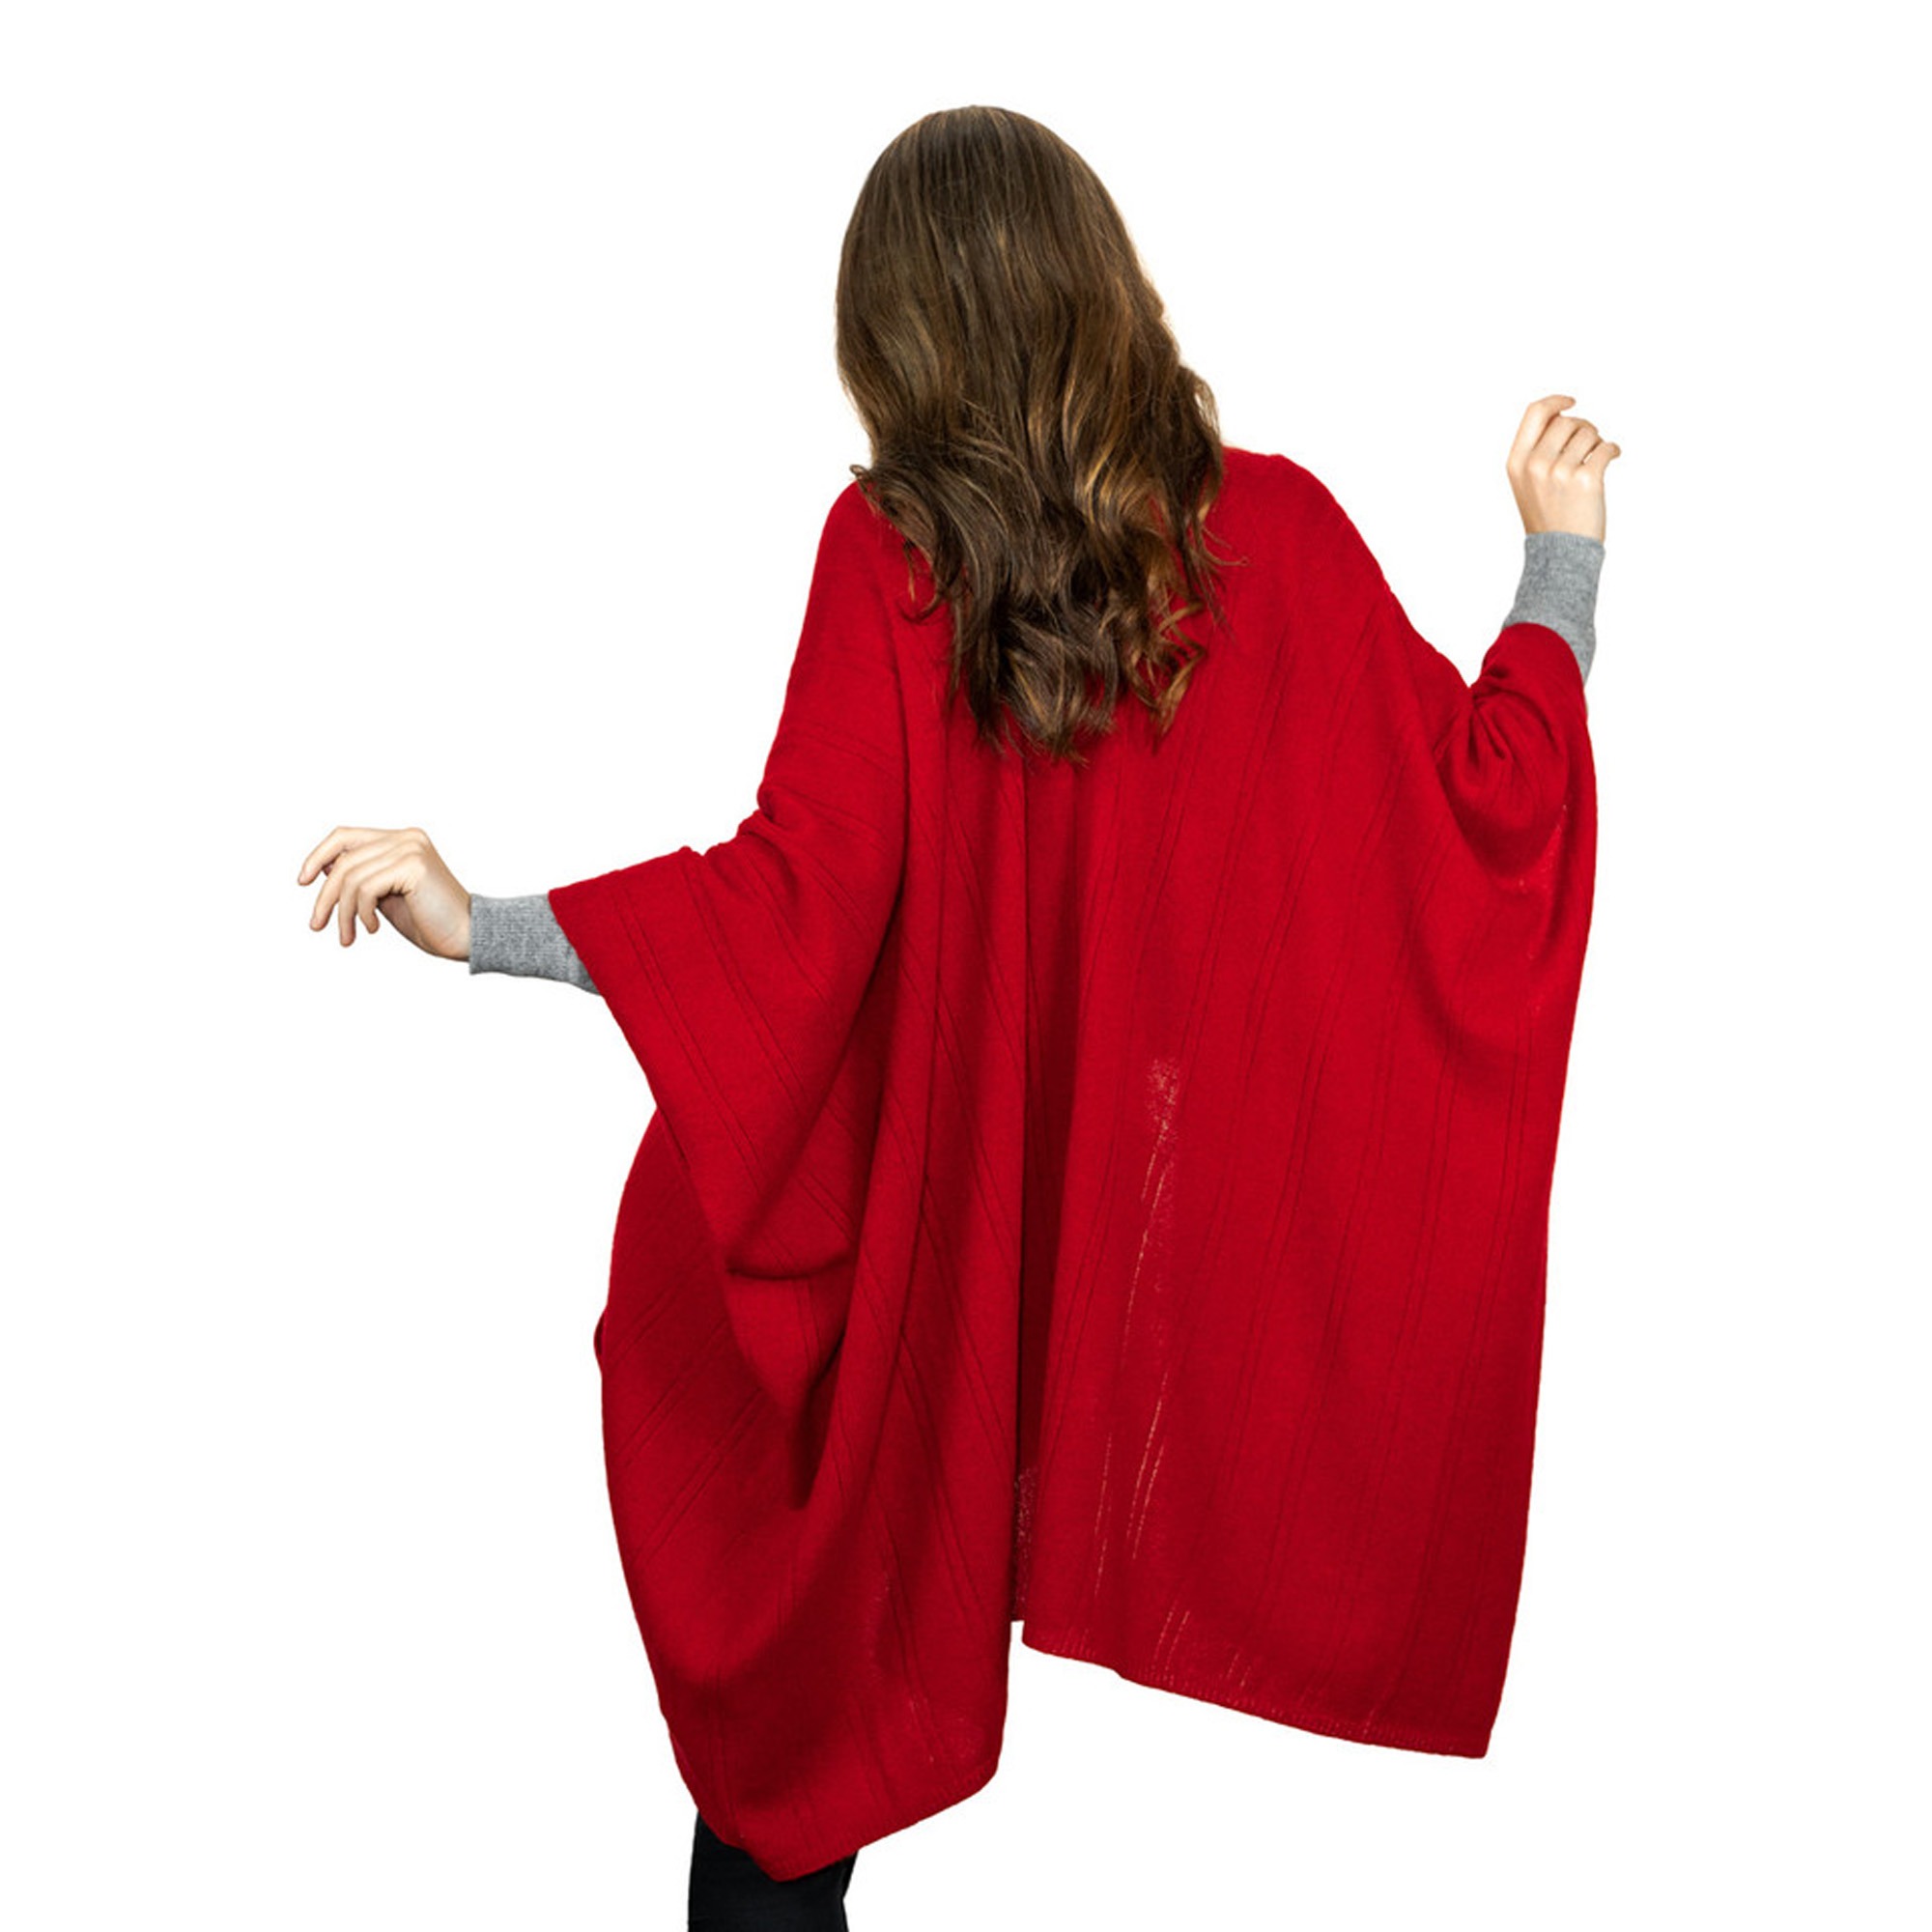 Lona Scott Cashmere Cape with Pockets, Red 4